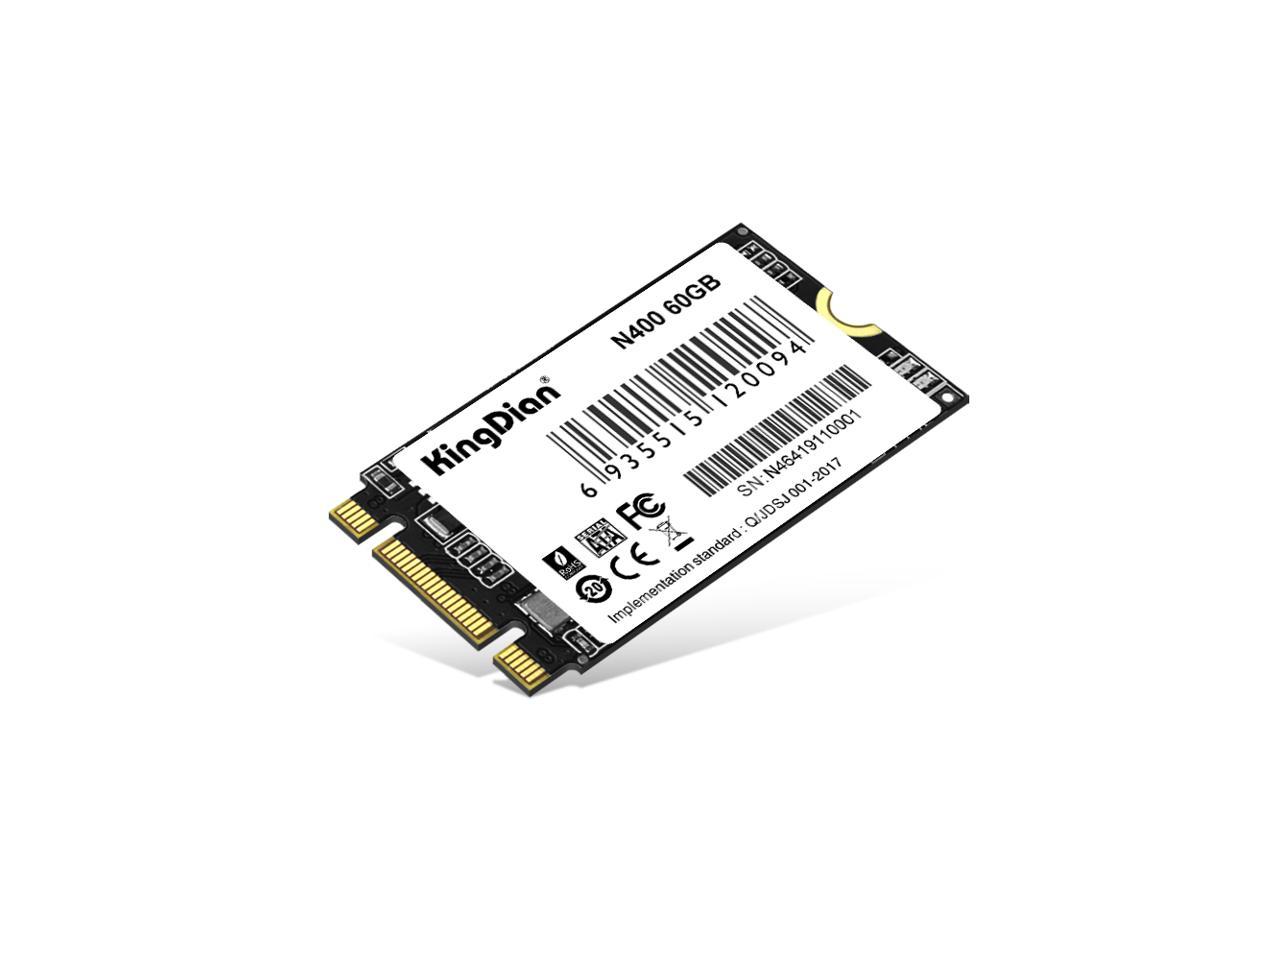 KingDian M.2 NGFF Solid State Drive for Desktop PCs and Mac Pro N400 64GB